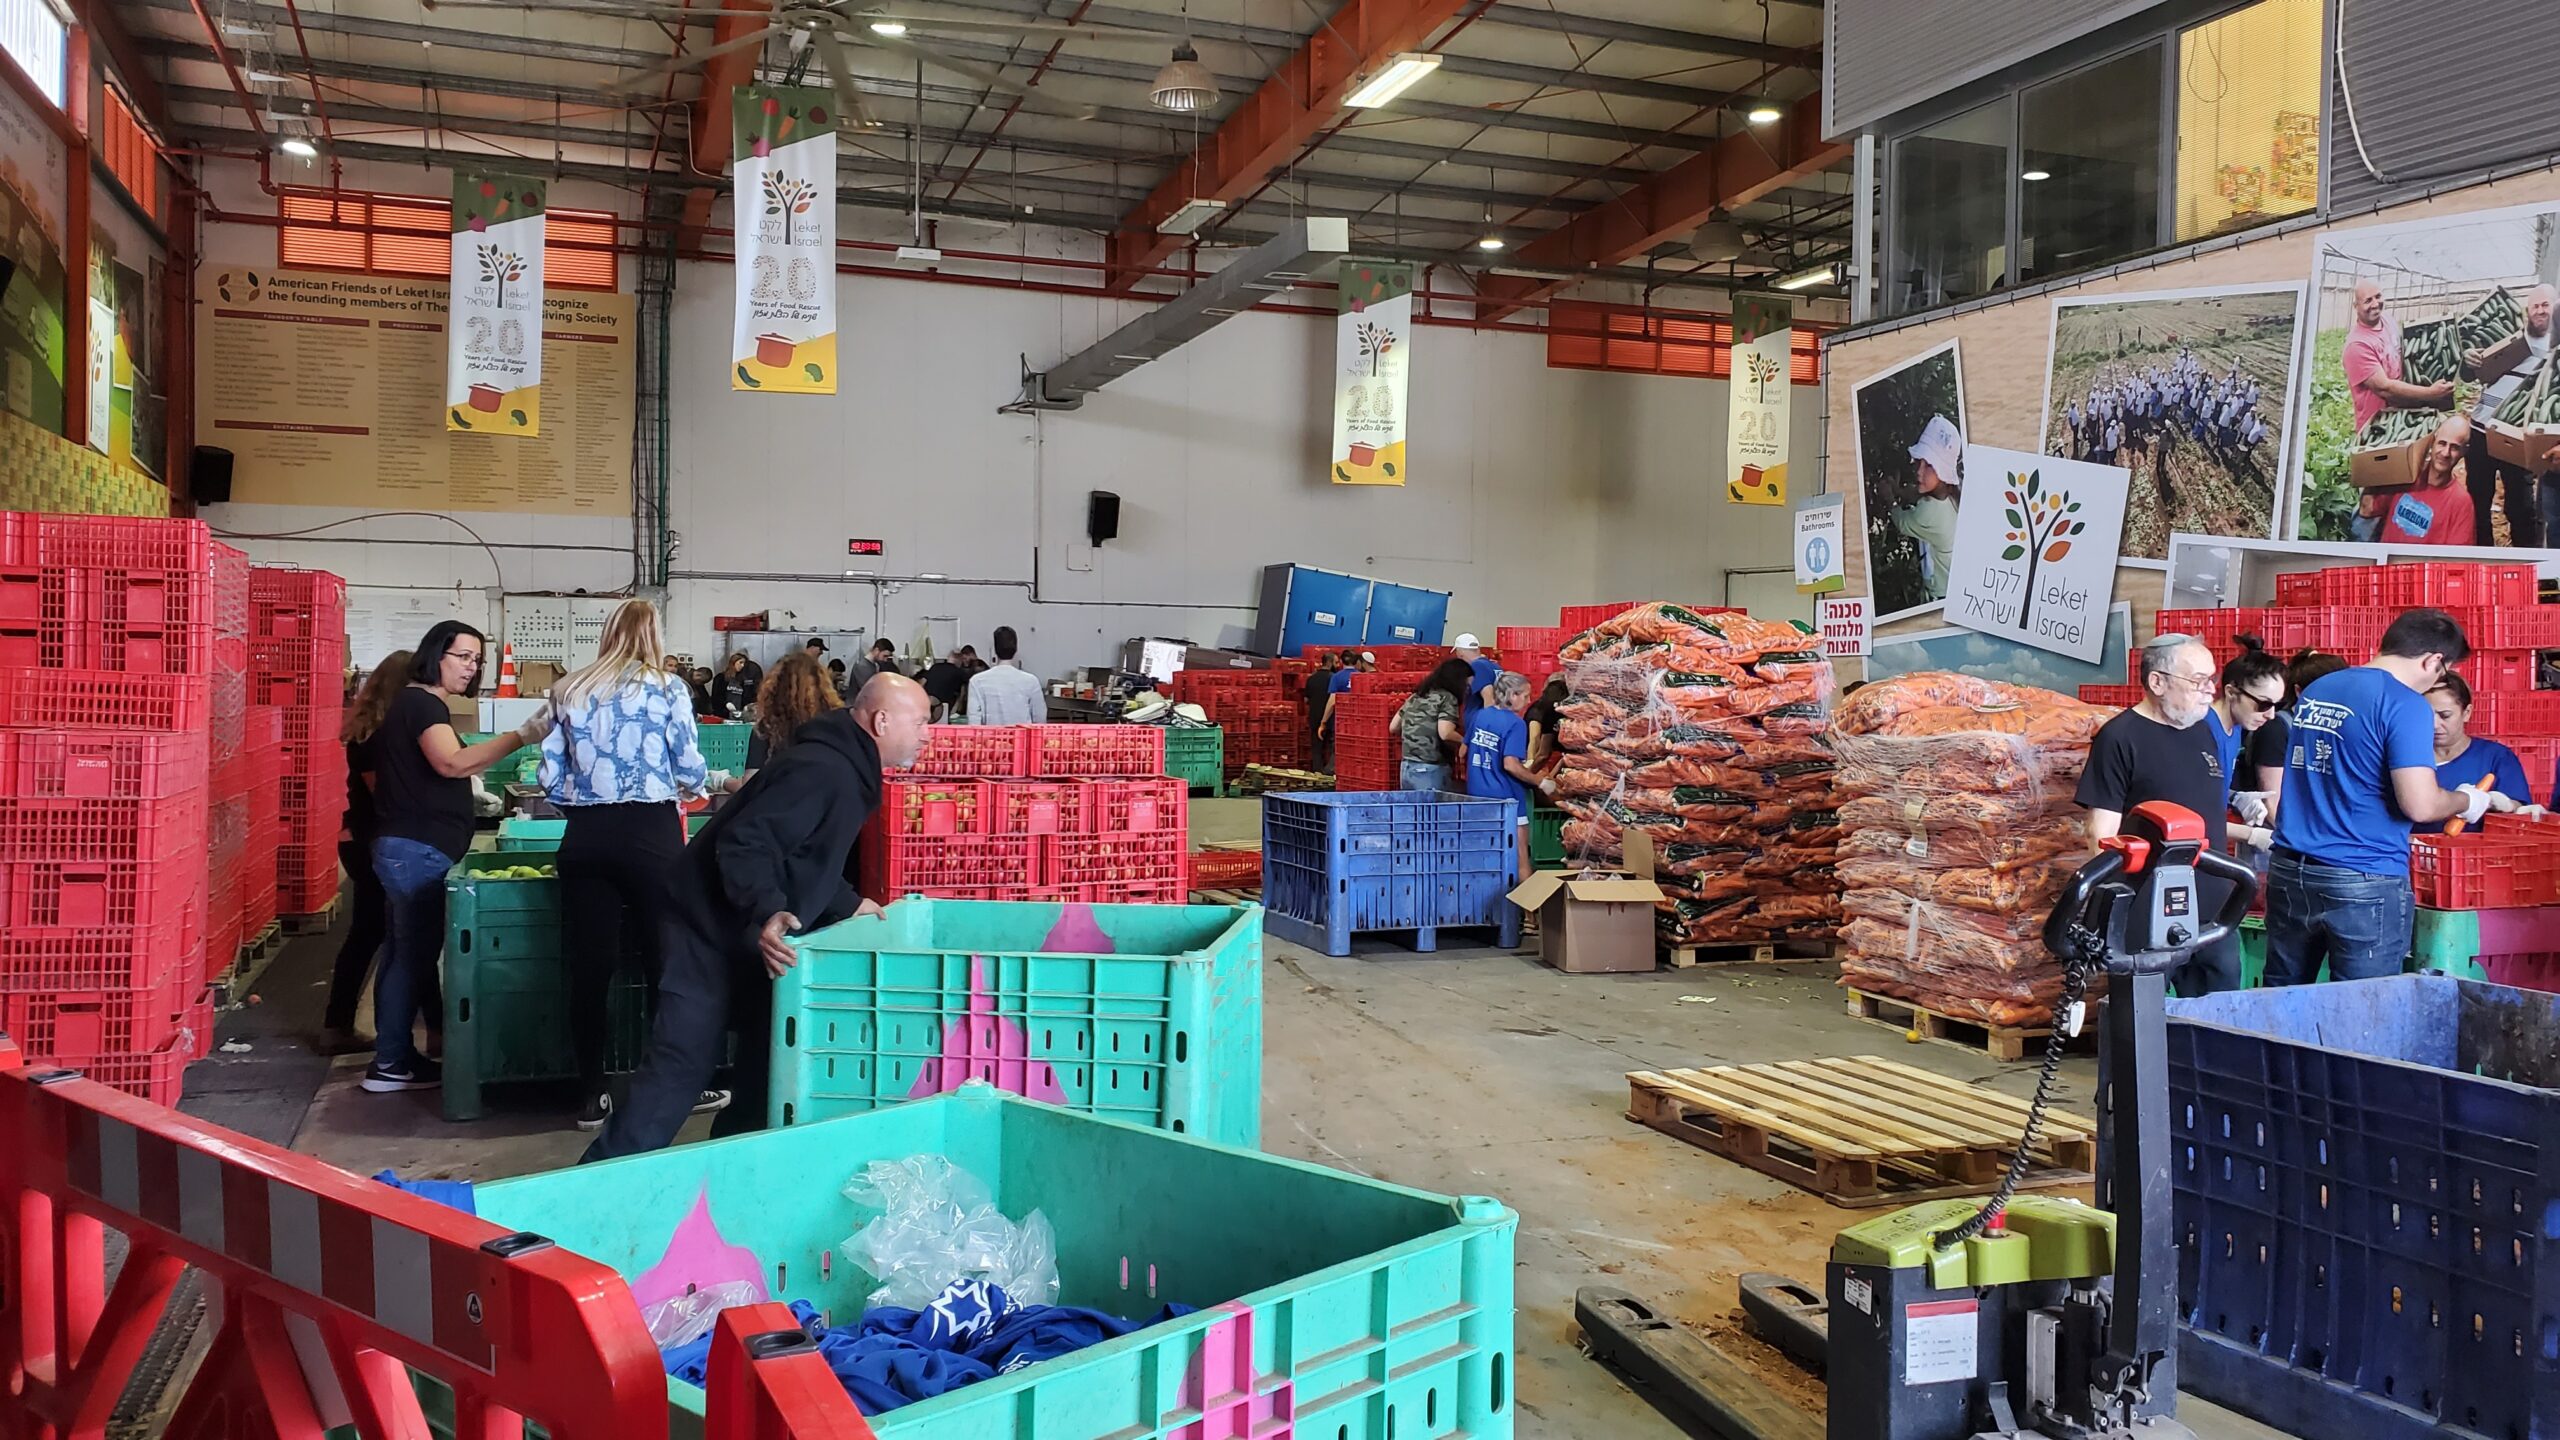 Brightly colored crates of food and people moving in a warehouse